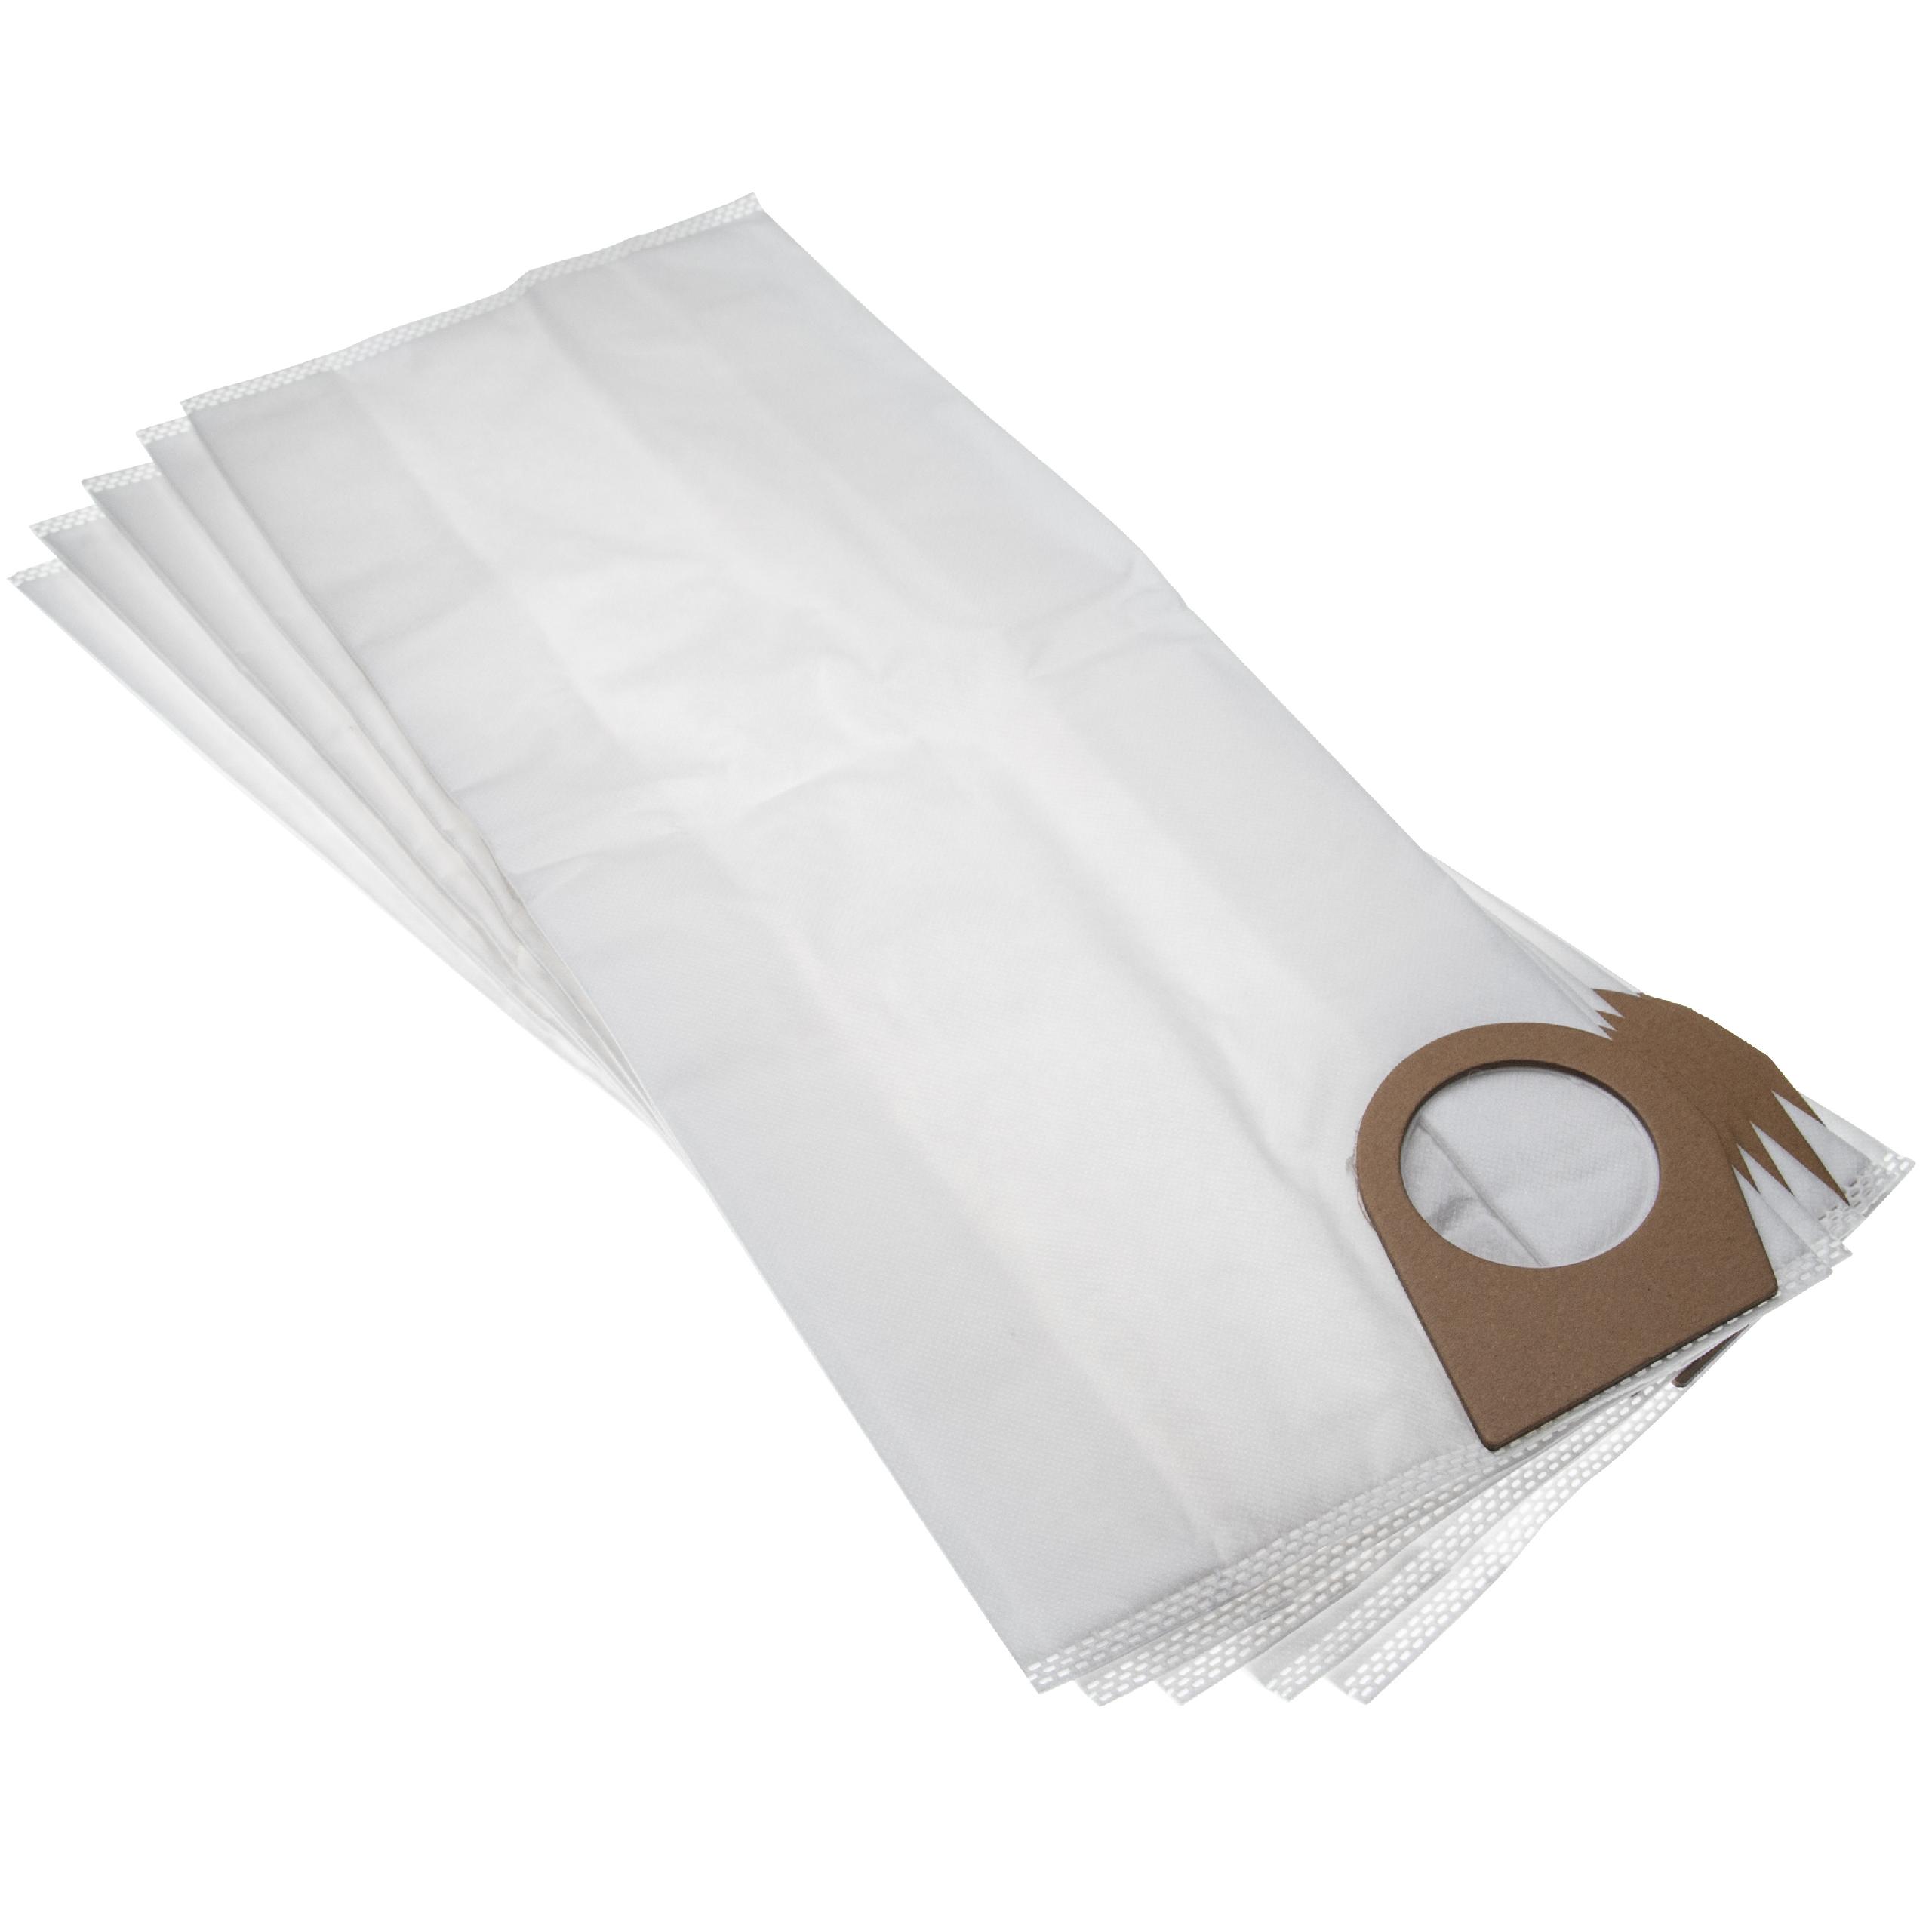 5x Vacuum Cleaner Bag replaces Bosch 1609201628 for Bosch - microfleece